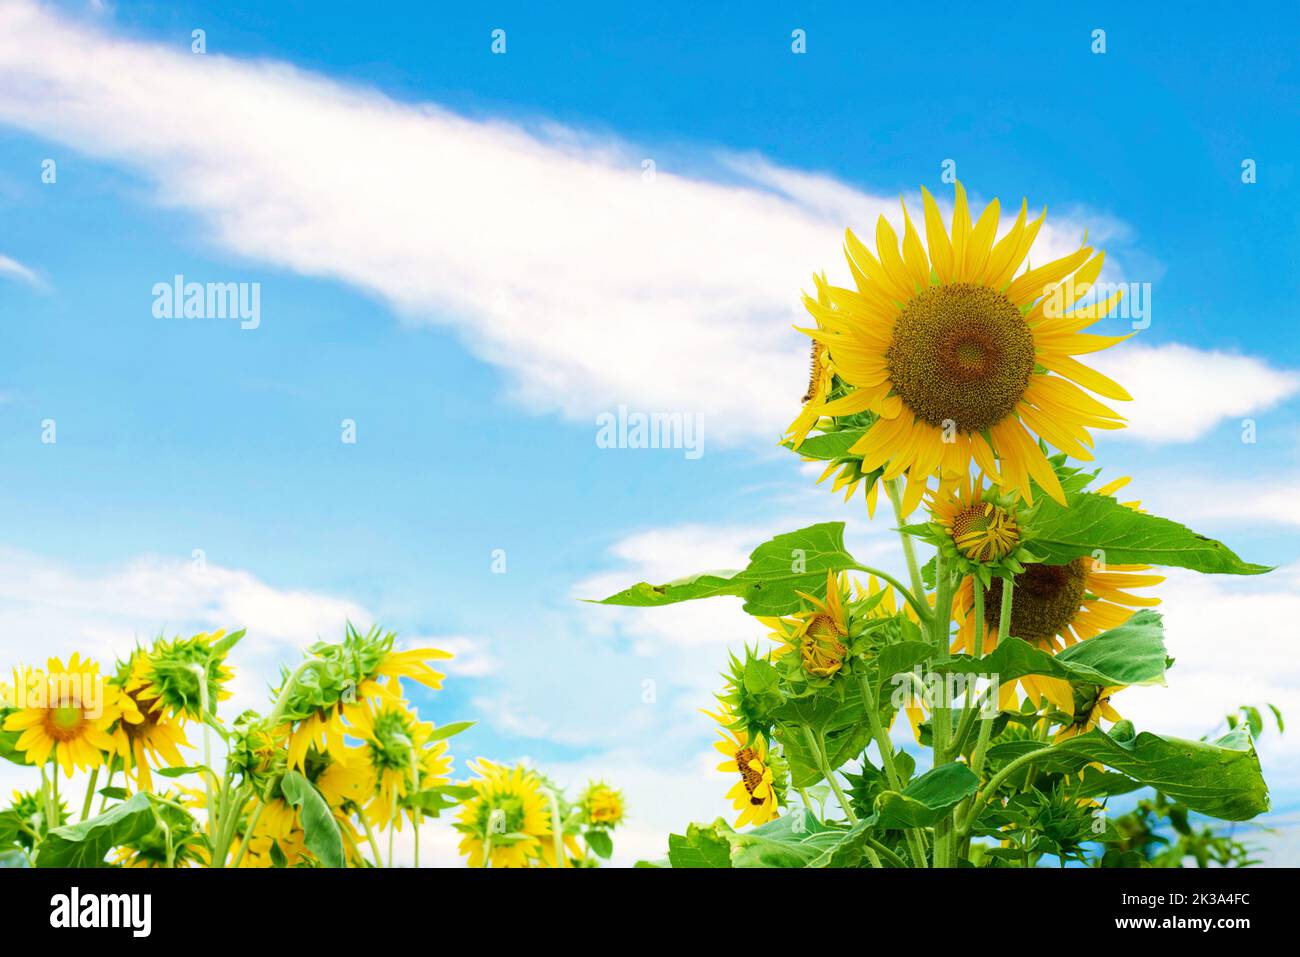 Sunflowers against blue sky without people Stock Photo